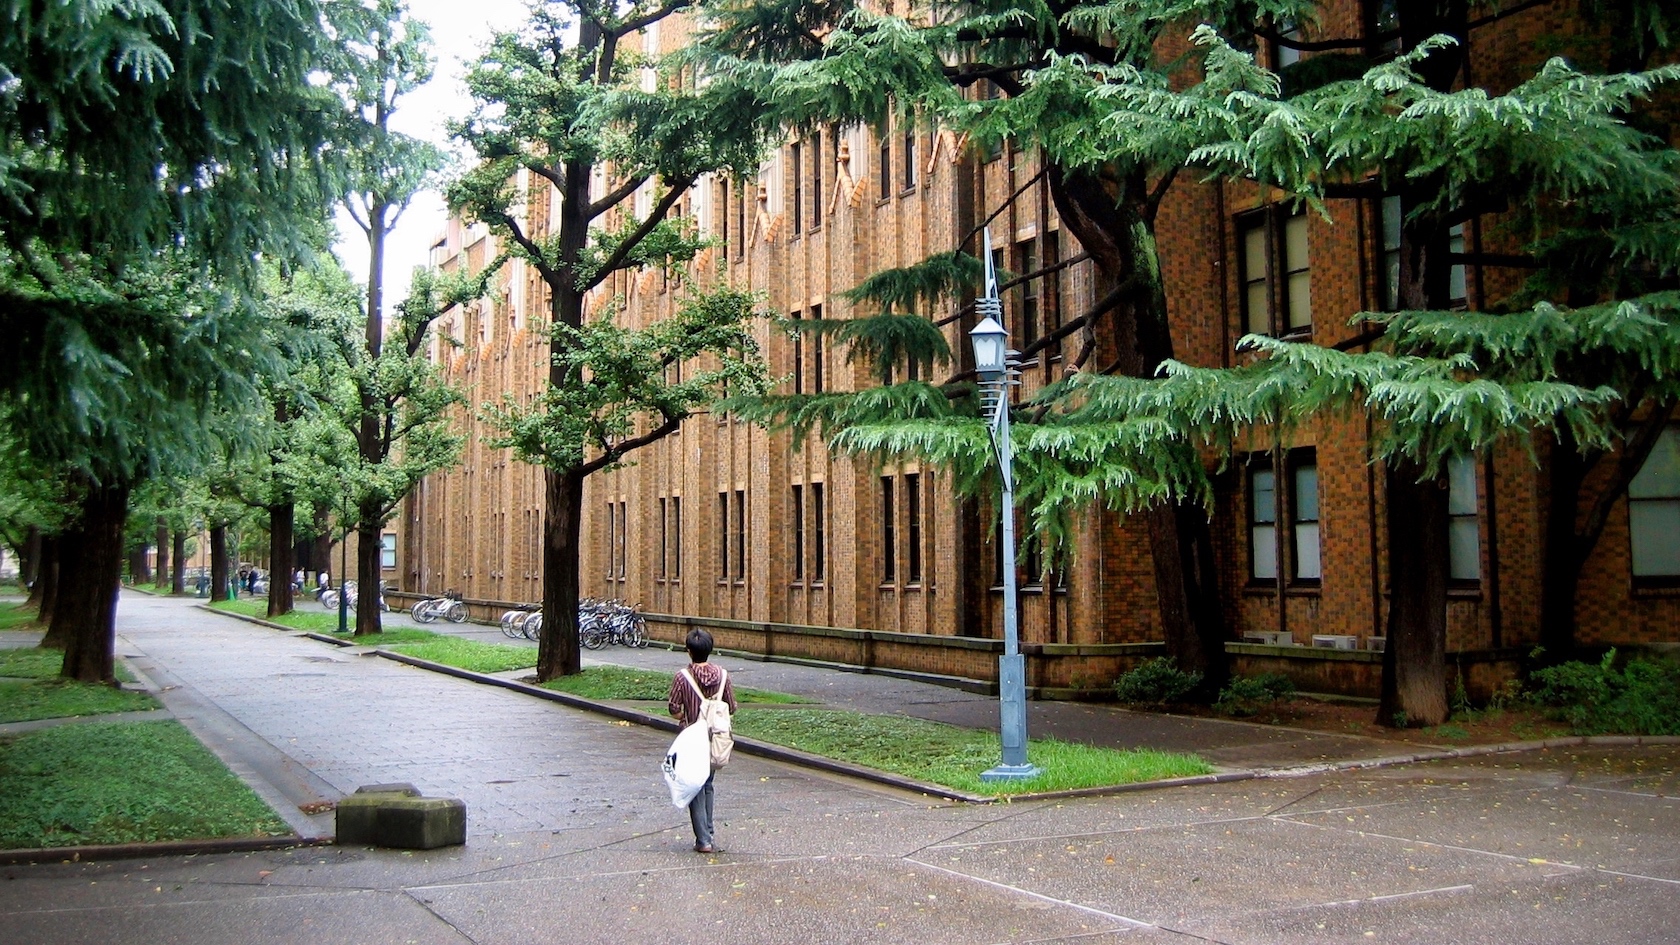 The University of Tokyo, Hongô Campus, Japan. Photo by Kusabi on Flickr.